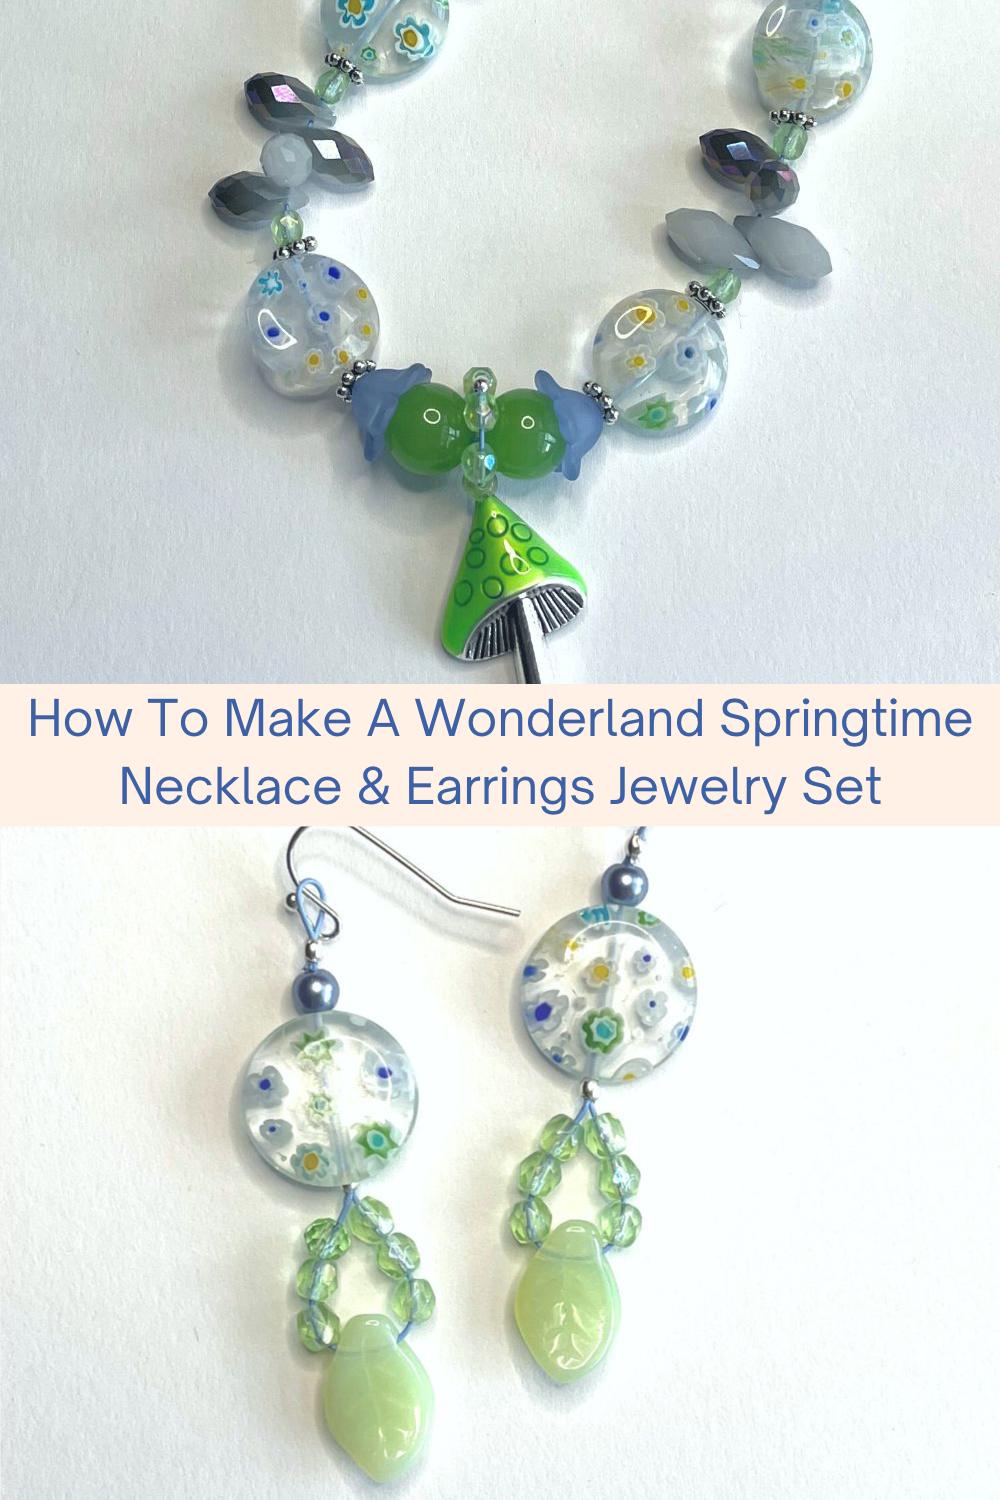 How To Make A Wonderland Springtime Necklace & Earrings Jewelry Set Collage